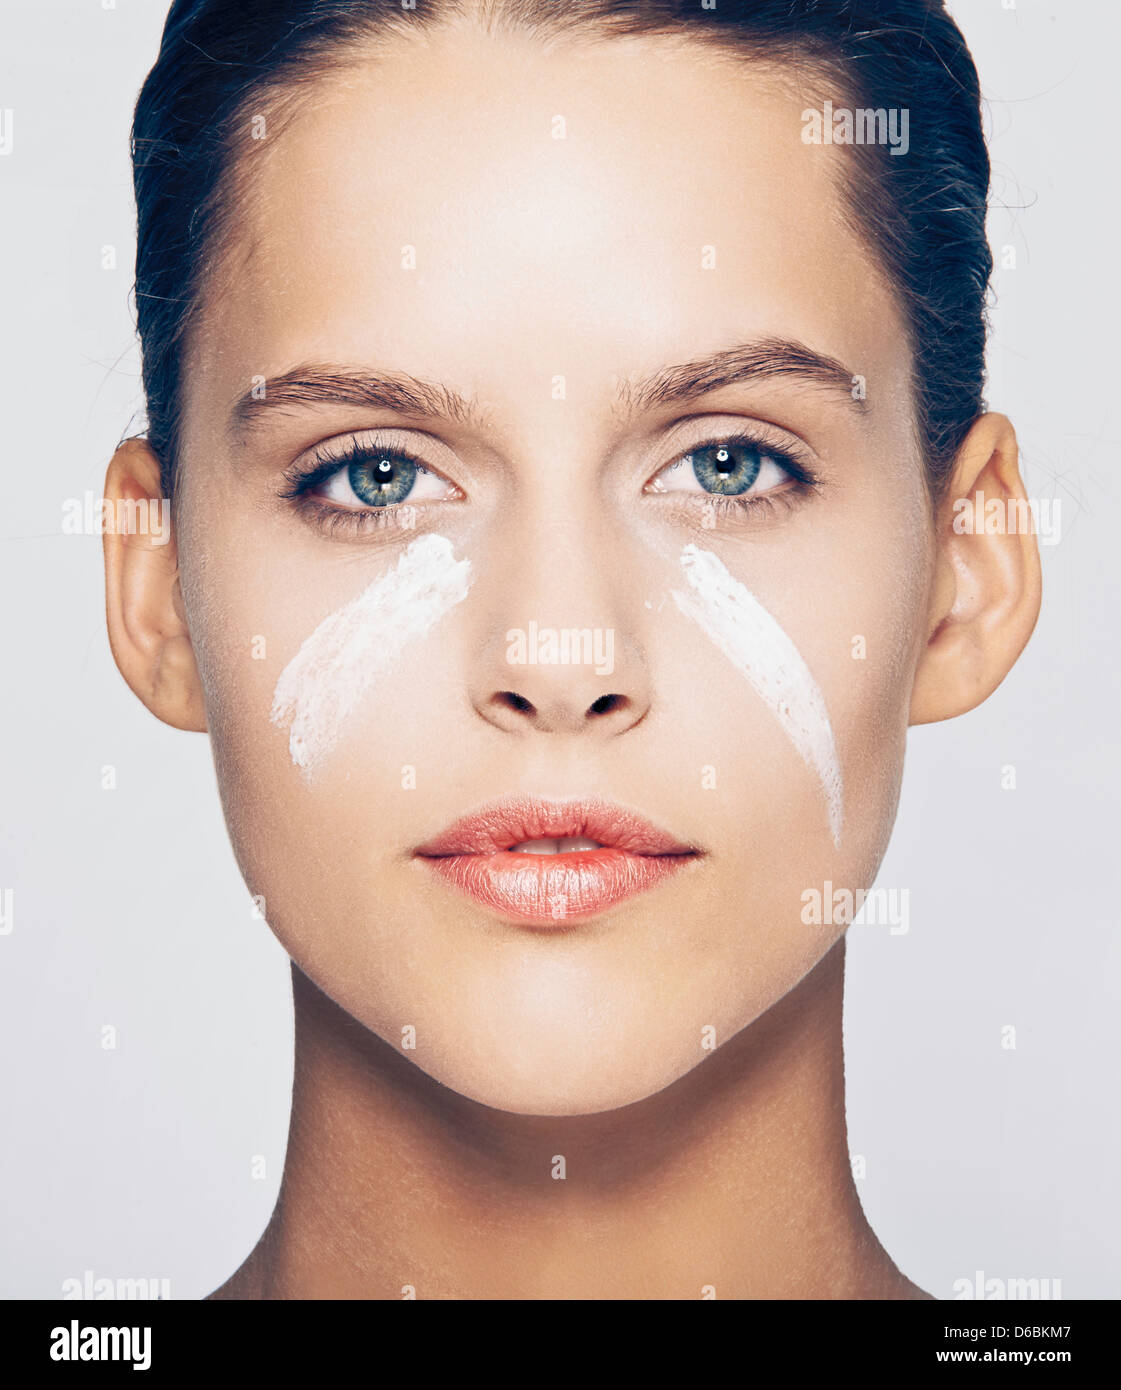 Woman with streaks of lotion on face Stock Photo